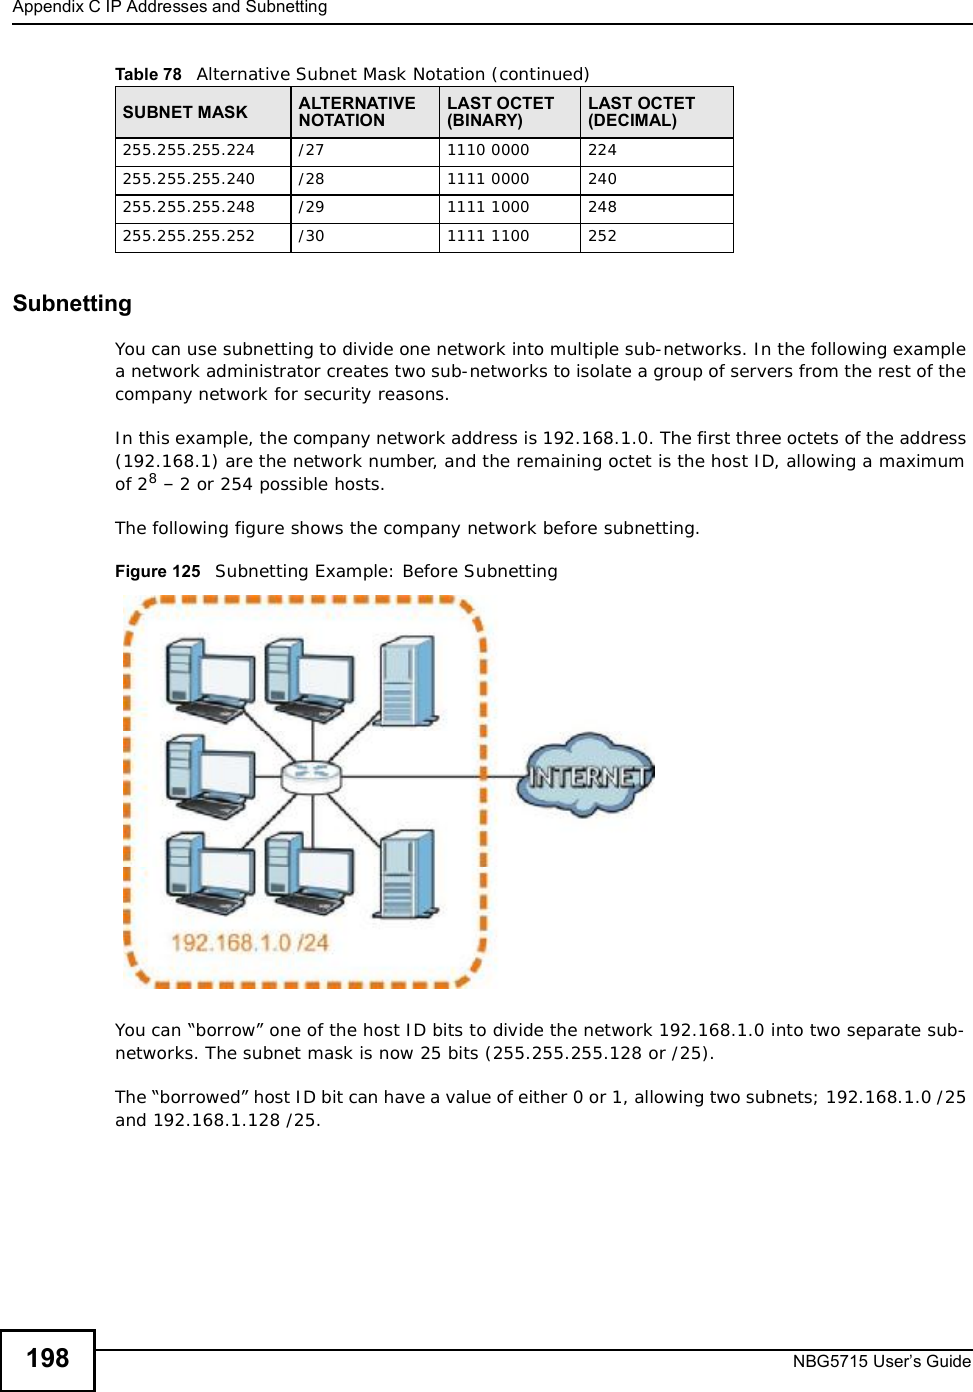 Appendix CIP Addresses and SubnettingNBG5715 User’s Guide198SubnettingYou can use subnetting to divide one network into multiple sub-networks. In the following example a network administrator creates two sub-networks to isolate a group of servers from the rest of the company network for security reasons.In this example, the company network address is 192.168.1.0. The first three octets of the address (192.168.1) are the network number, and the remaining octet is the host ID, allowing a maximum of 28 – 2 or 254 possible hosts.The following figure shows the company network before subnetting.  Figure 125   Subnetting Example: Before SubnettingYou can “borrow” one of the host ID bits to divide the network 192.168.1.0 into two separate sub-networks. The subnet mask is now 25 bits (255.255.255.128 or /25).The “borrowed” host ID bit can have a value of either 0 or 1, allowing two subnets; 192.168.1.0 /25 and 192.168.1.128 /25. 255.255.255.224 /27 1110 0000 224255.255.255.240 /28 1111 0000 240255.255.255.248 /29 1111 1000 248255.255.255.252 /30 1111 1100 252Table 78   Alternative Subnet Mask Notation (continued)SUBNET MASK ALTERNATIVE NOTATIONLAST OCTET (BINARY)LAST OCTET (DECIMAL)